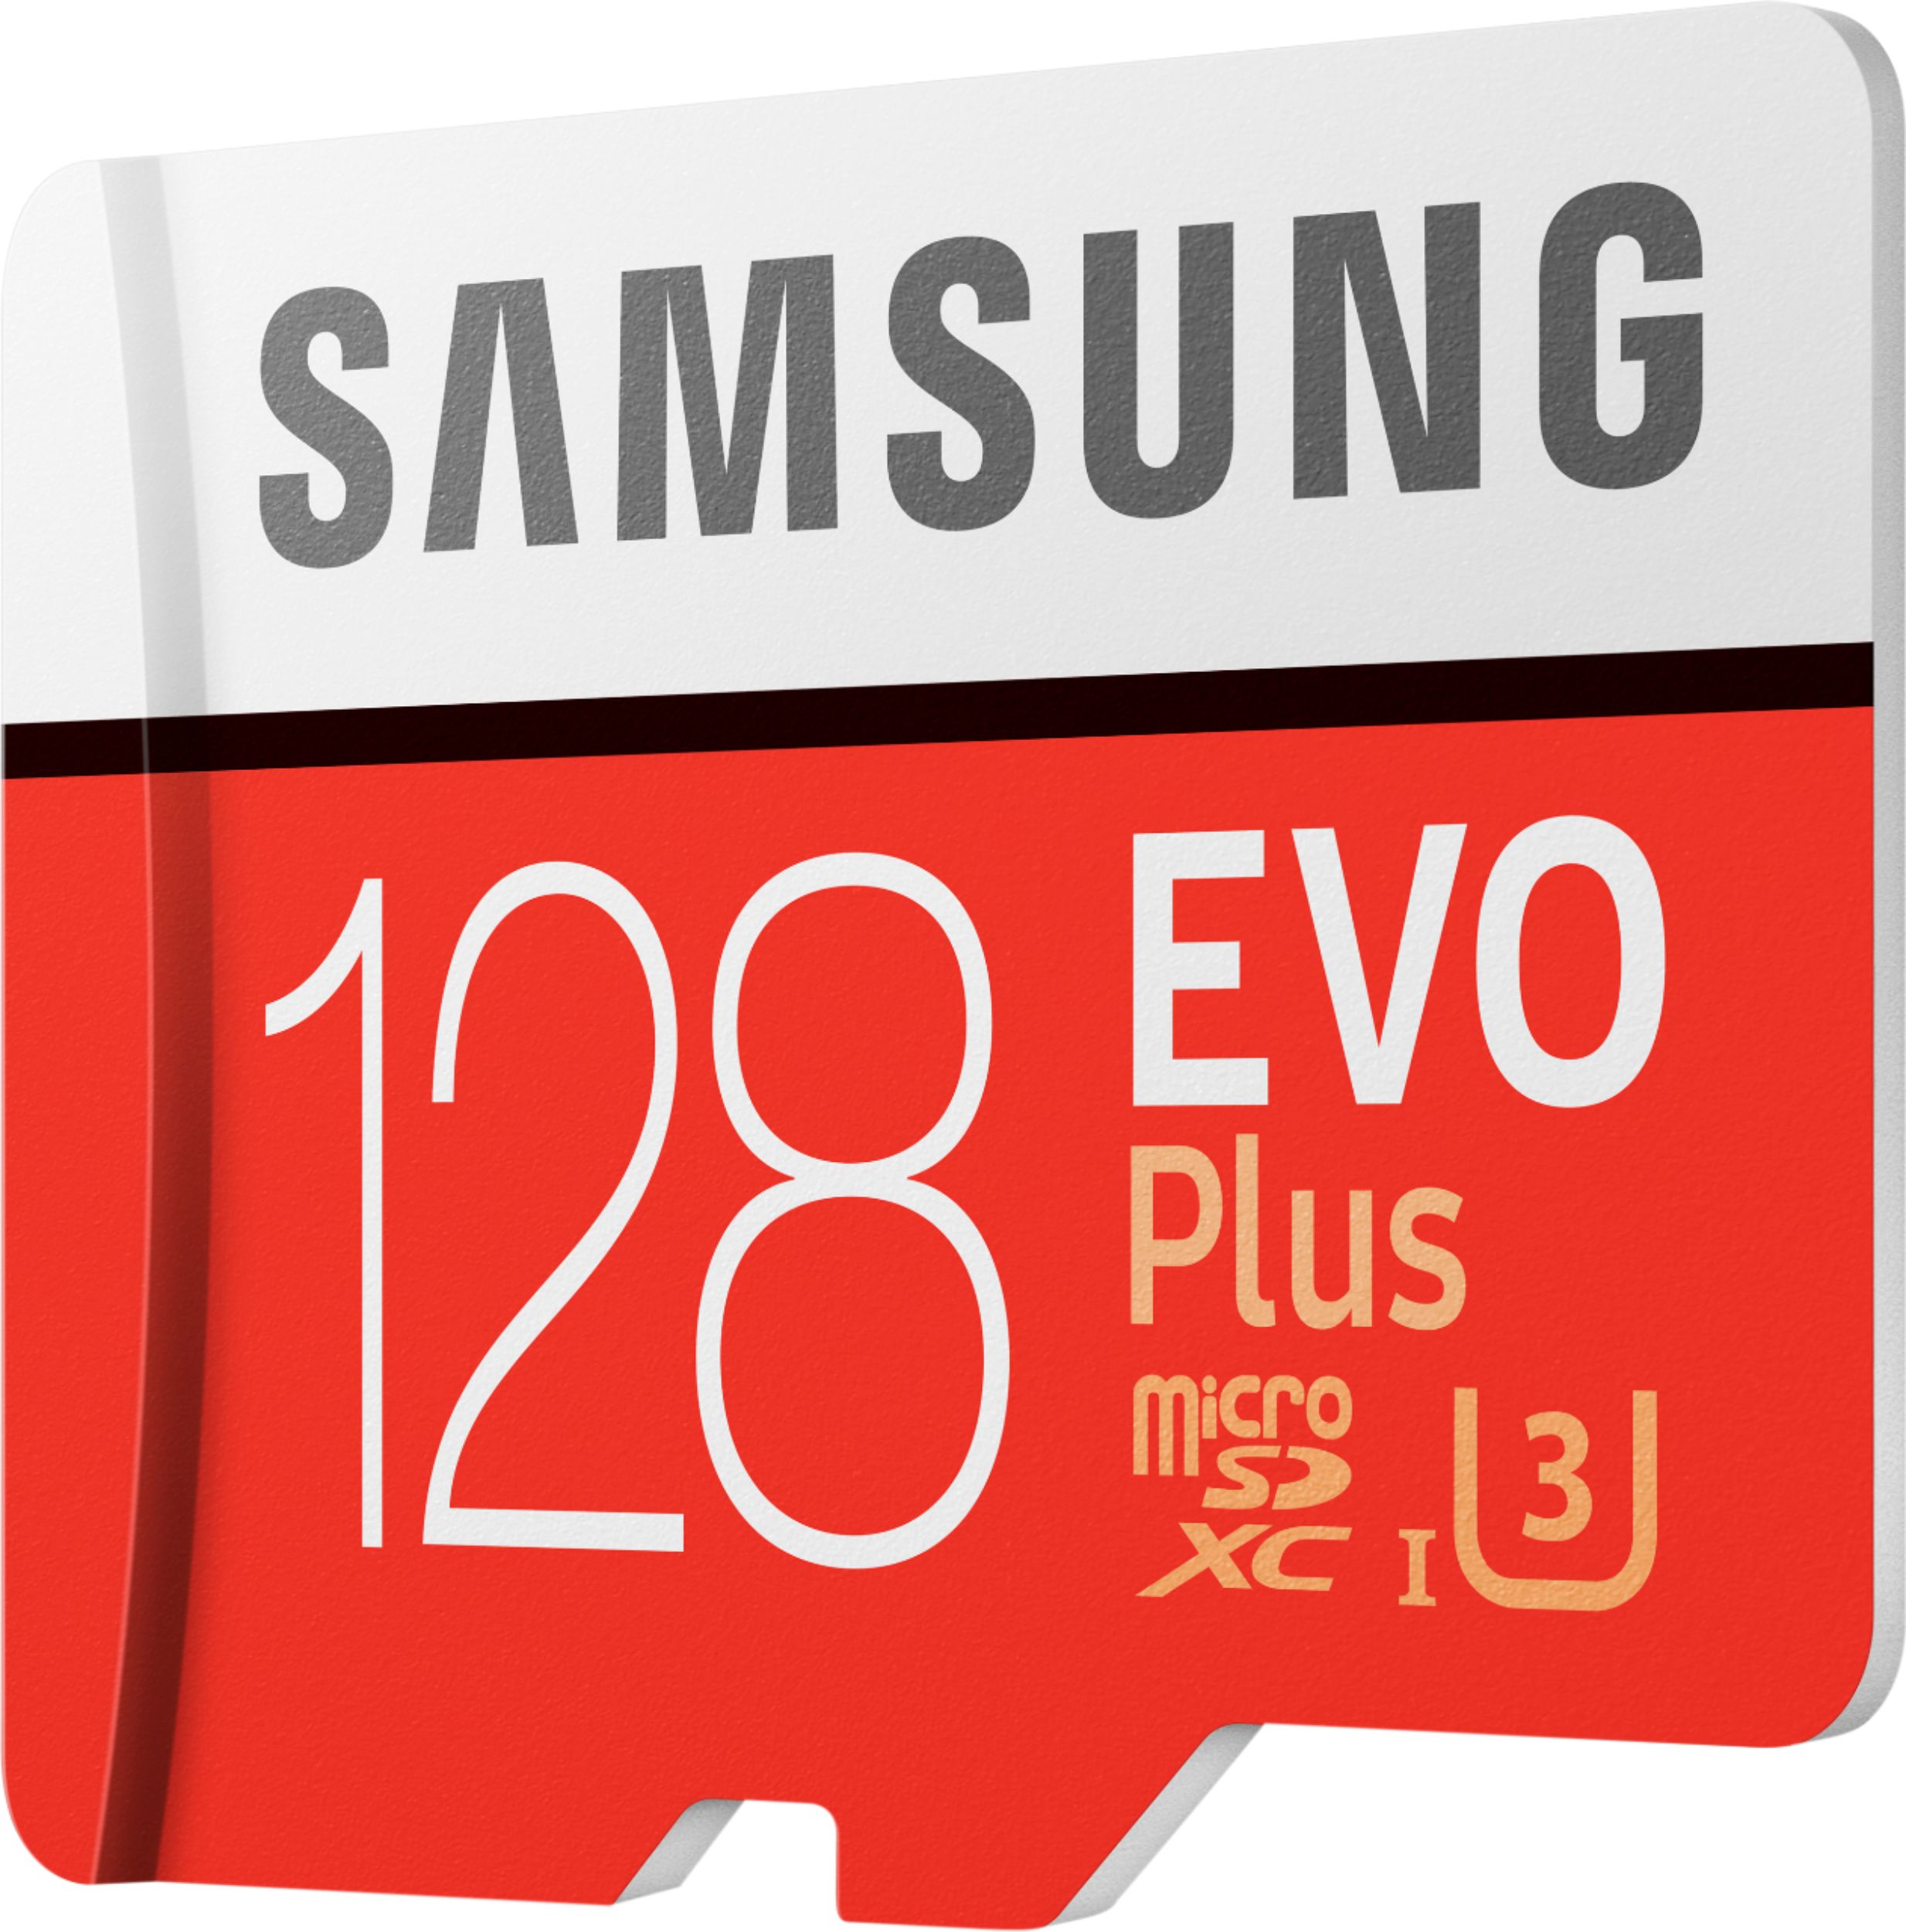 Built for Lifetime of Use! UHS-I,U3,80MBs MIXZA Performance Grade 128GB Verified for Samsung Galaxy S21 MicroSDXC Card is Pro-Speed Heat & Cold Resistant 